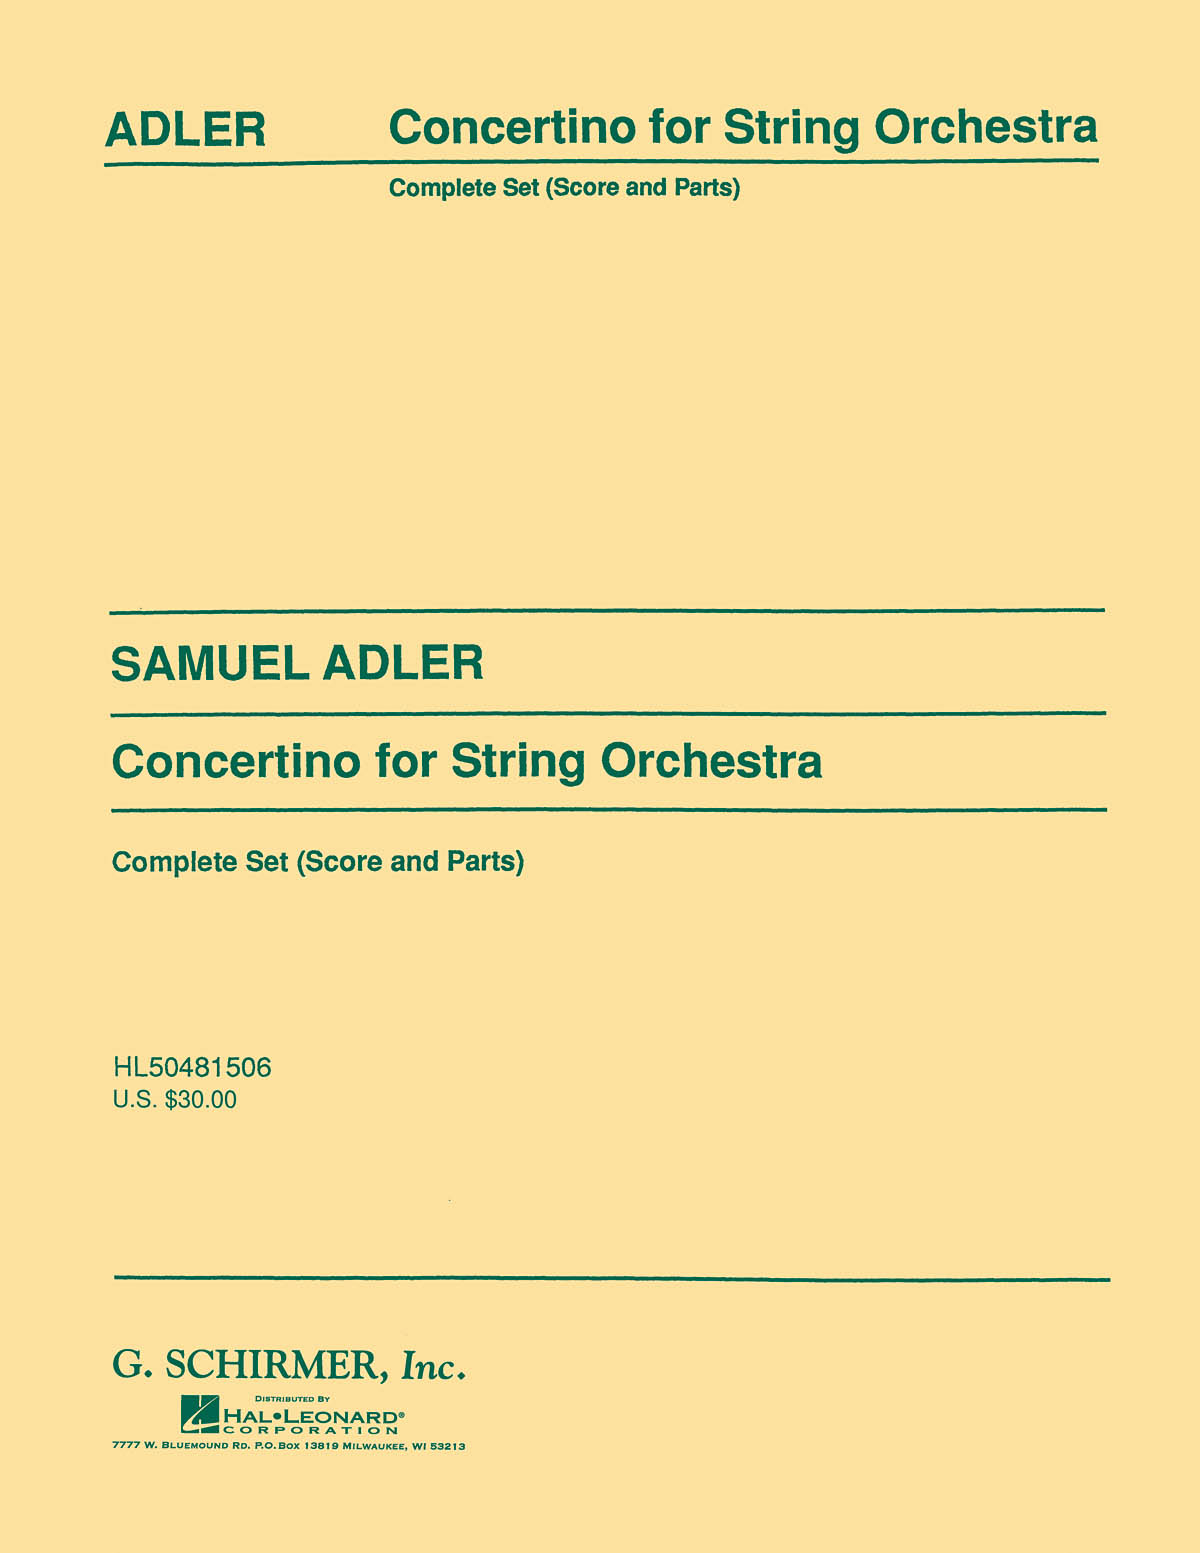 S. Adler: Concertino for String Orchestra: Orchestra: Score & Parts